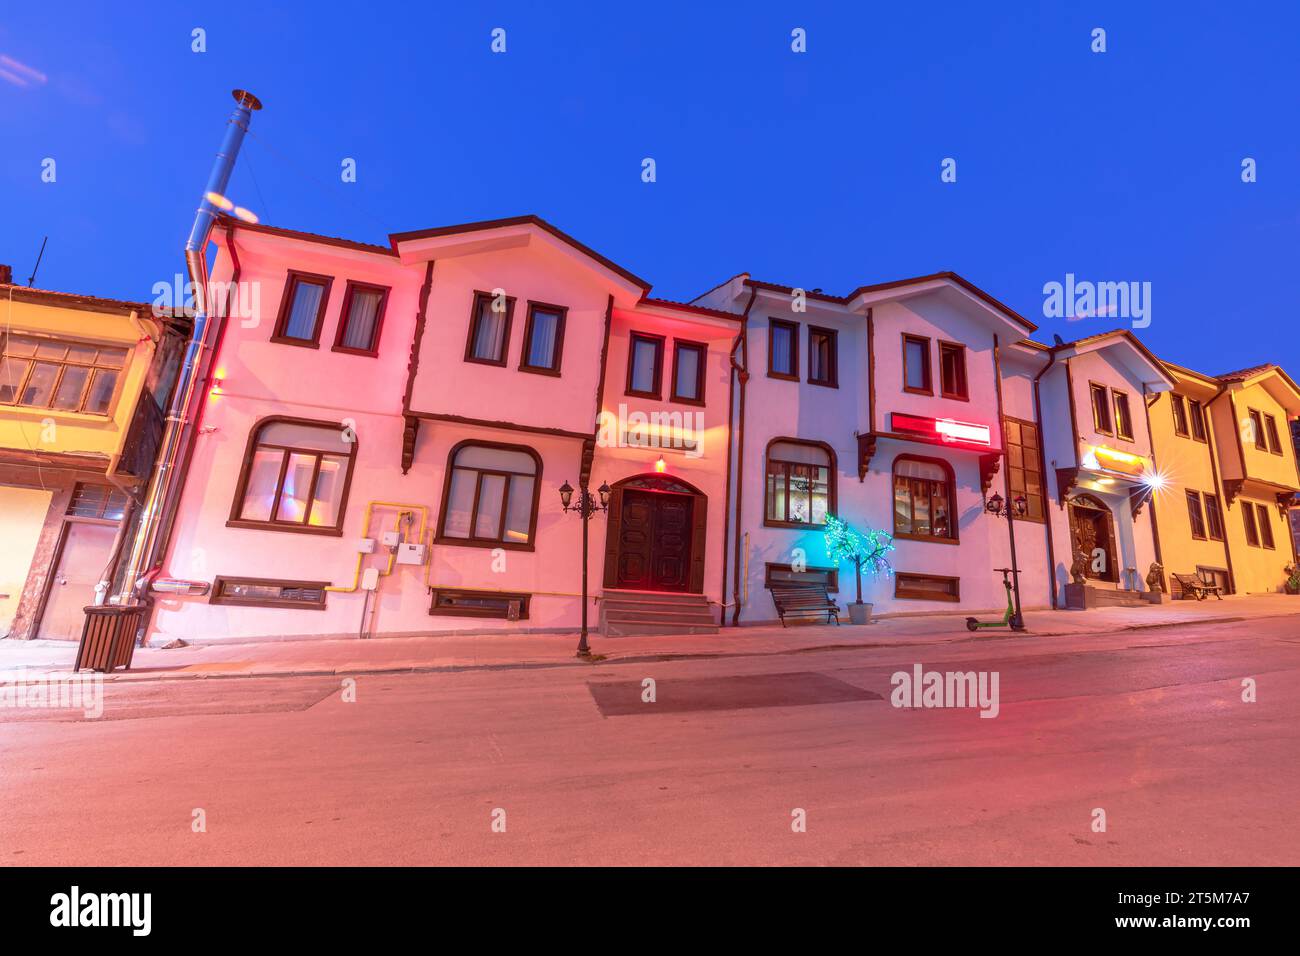 As night falls upon Eskisehir city, the ancient Odunpazari quarter with its architectural wonders adding a touch of timeless elegance to Turkey's Stock Photo